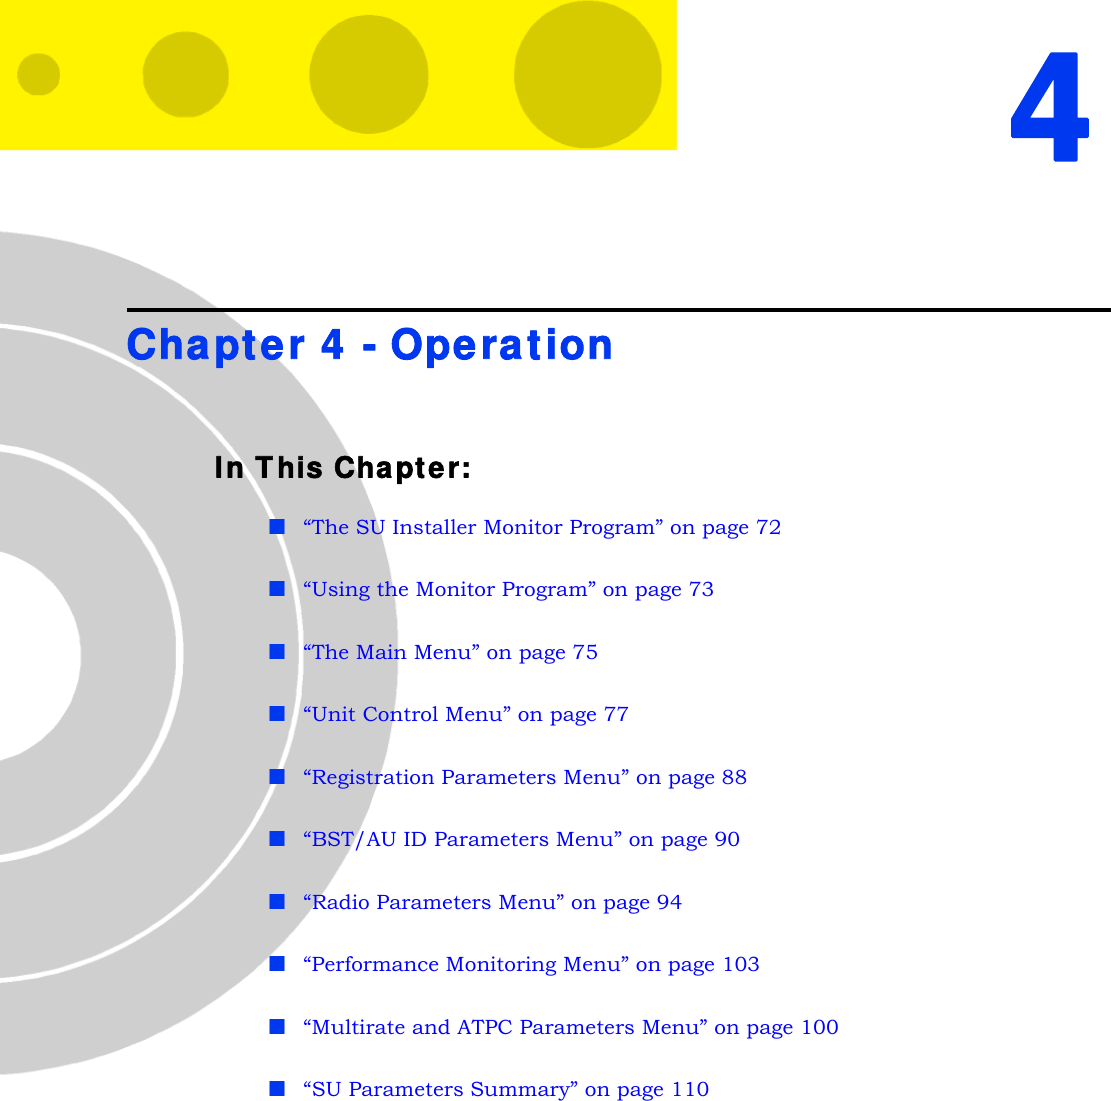 4Chapter 4 - OperationIn This Chapter:“The SU Installer Monitor Program” on page 72“Using the Monitor Program” on page 73“The Main Menu” on page 75“Unit Control Menu” on page 77“Registration Parameters Menu” on page 88“BST/AU ID Parameters Menu” on page 90“Radio Parameters Menu” on page 94“Performance Monitoring Menu” on page 103“Multirate and ATPC Parameters Menu” on page 100“SU Parameters Summary” on page 110